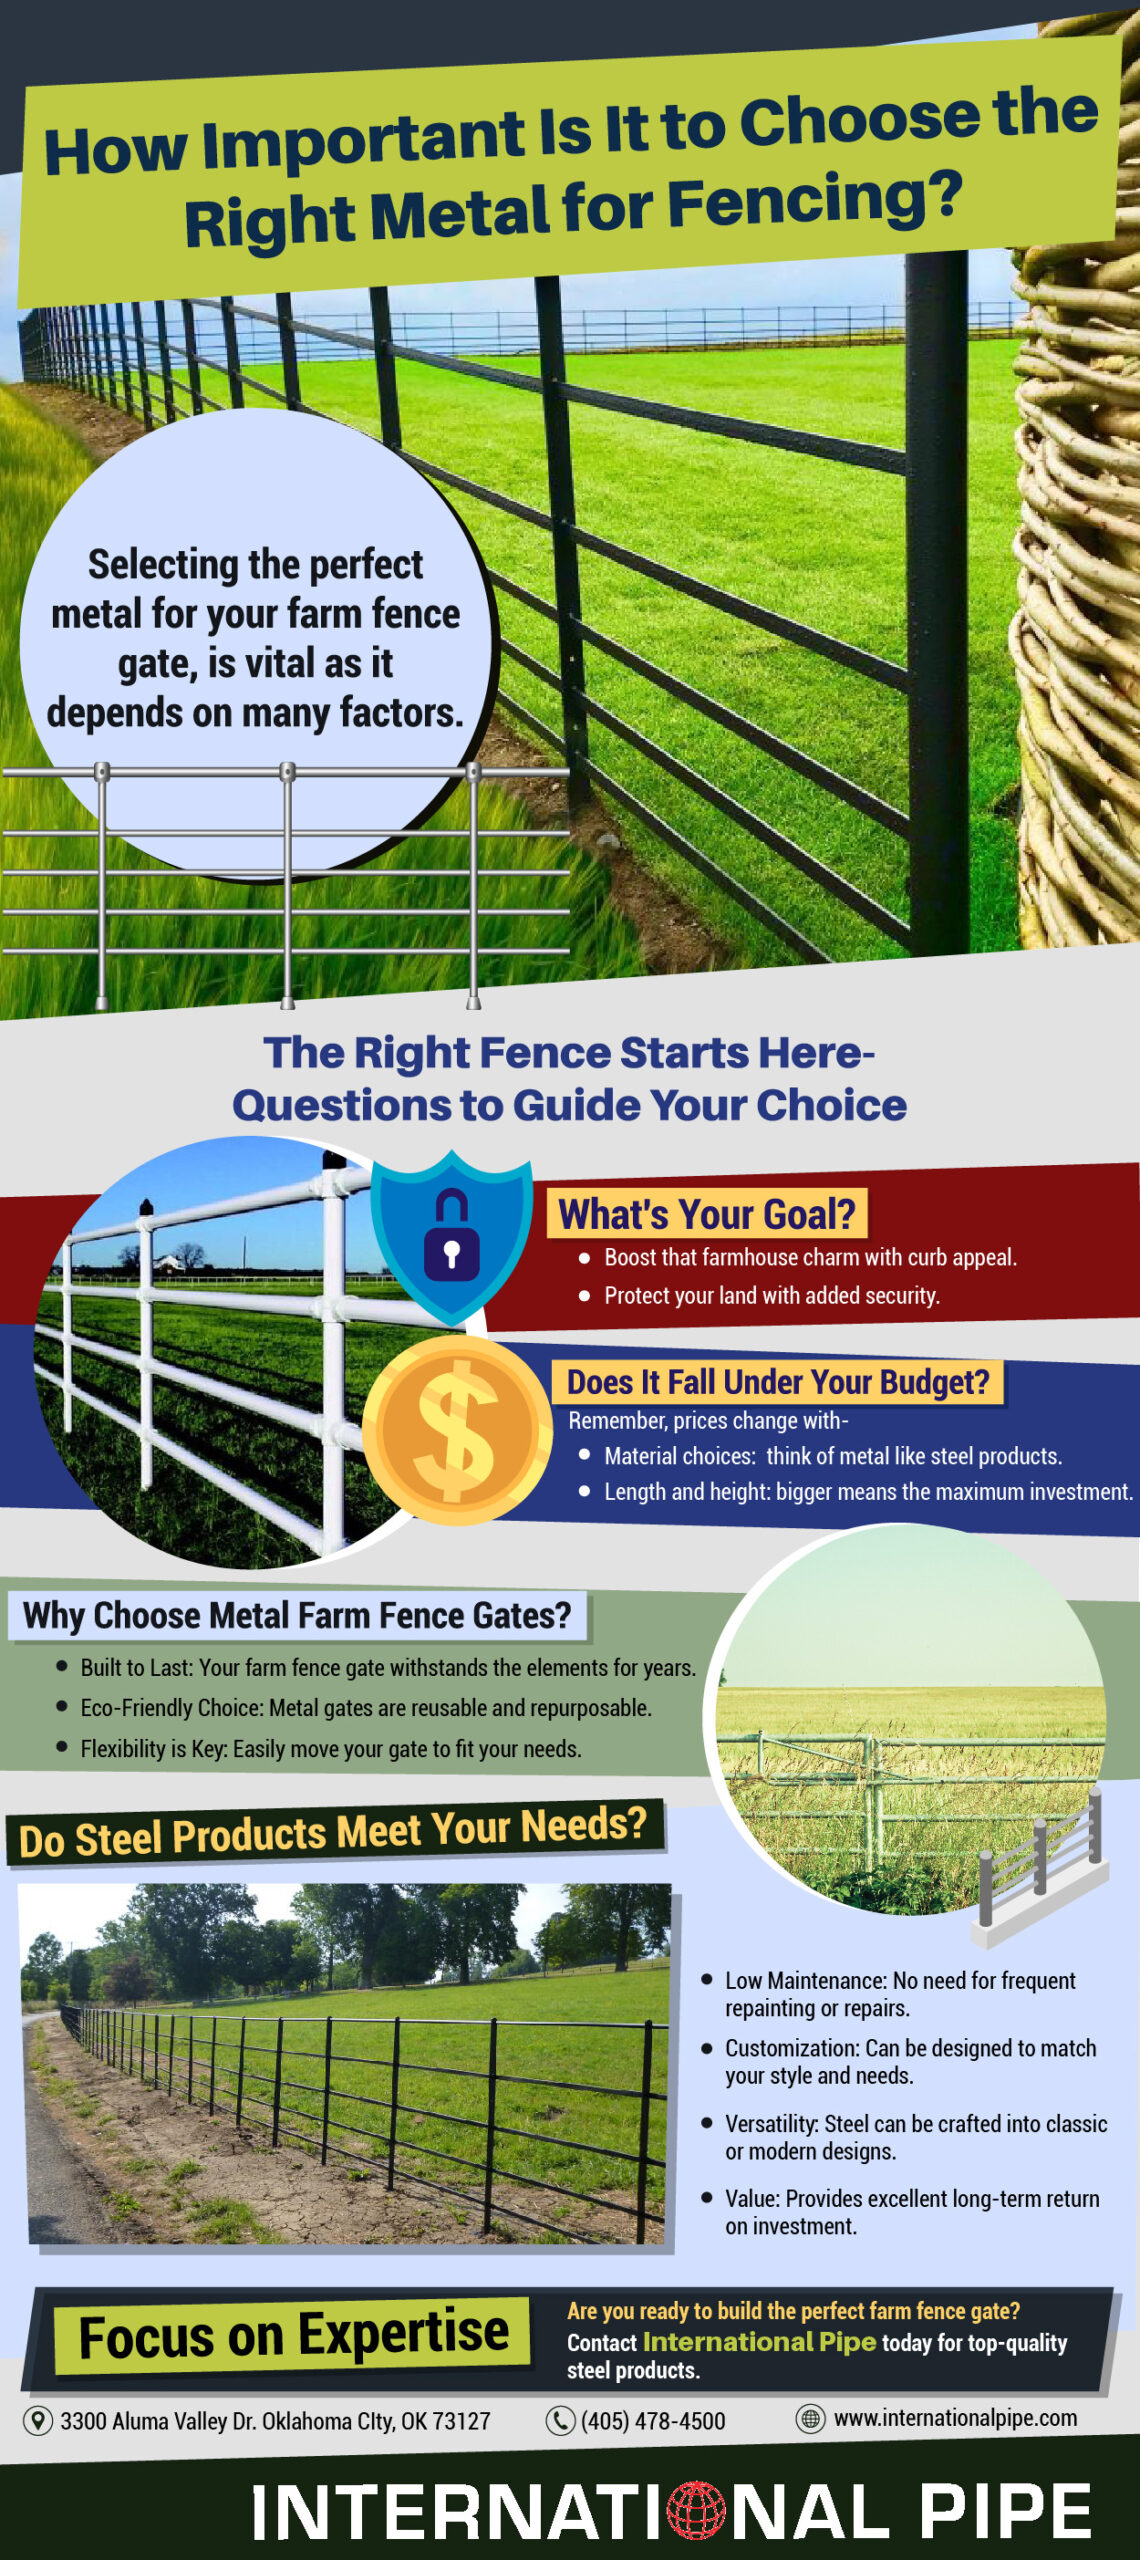 How Important Is It to Choose the Right Metal for Fencing